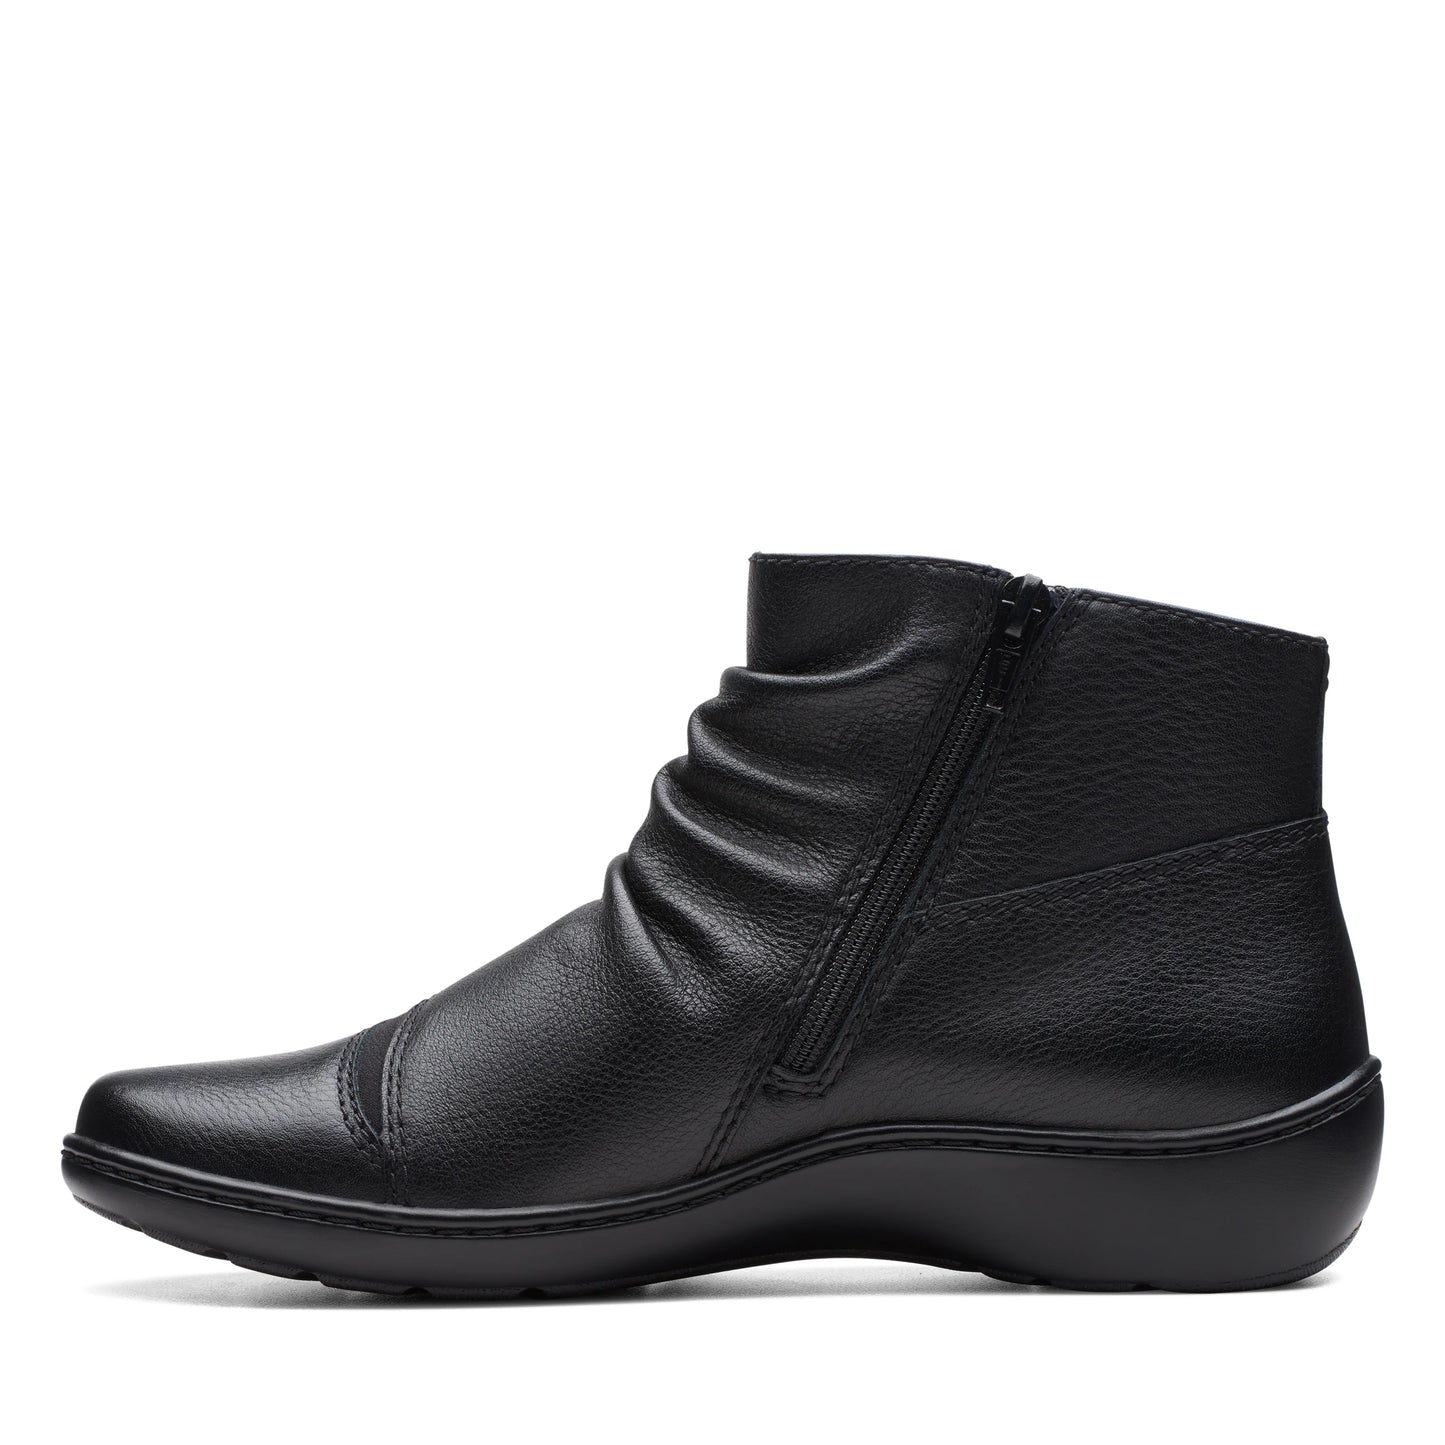 CLARKS | BOTINES MUJER | CORA DERBY BLACK LEATHER | NEGRO